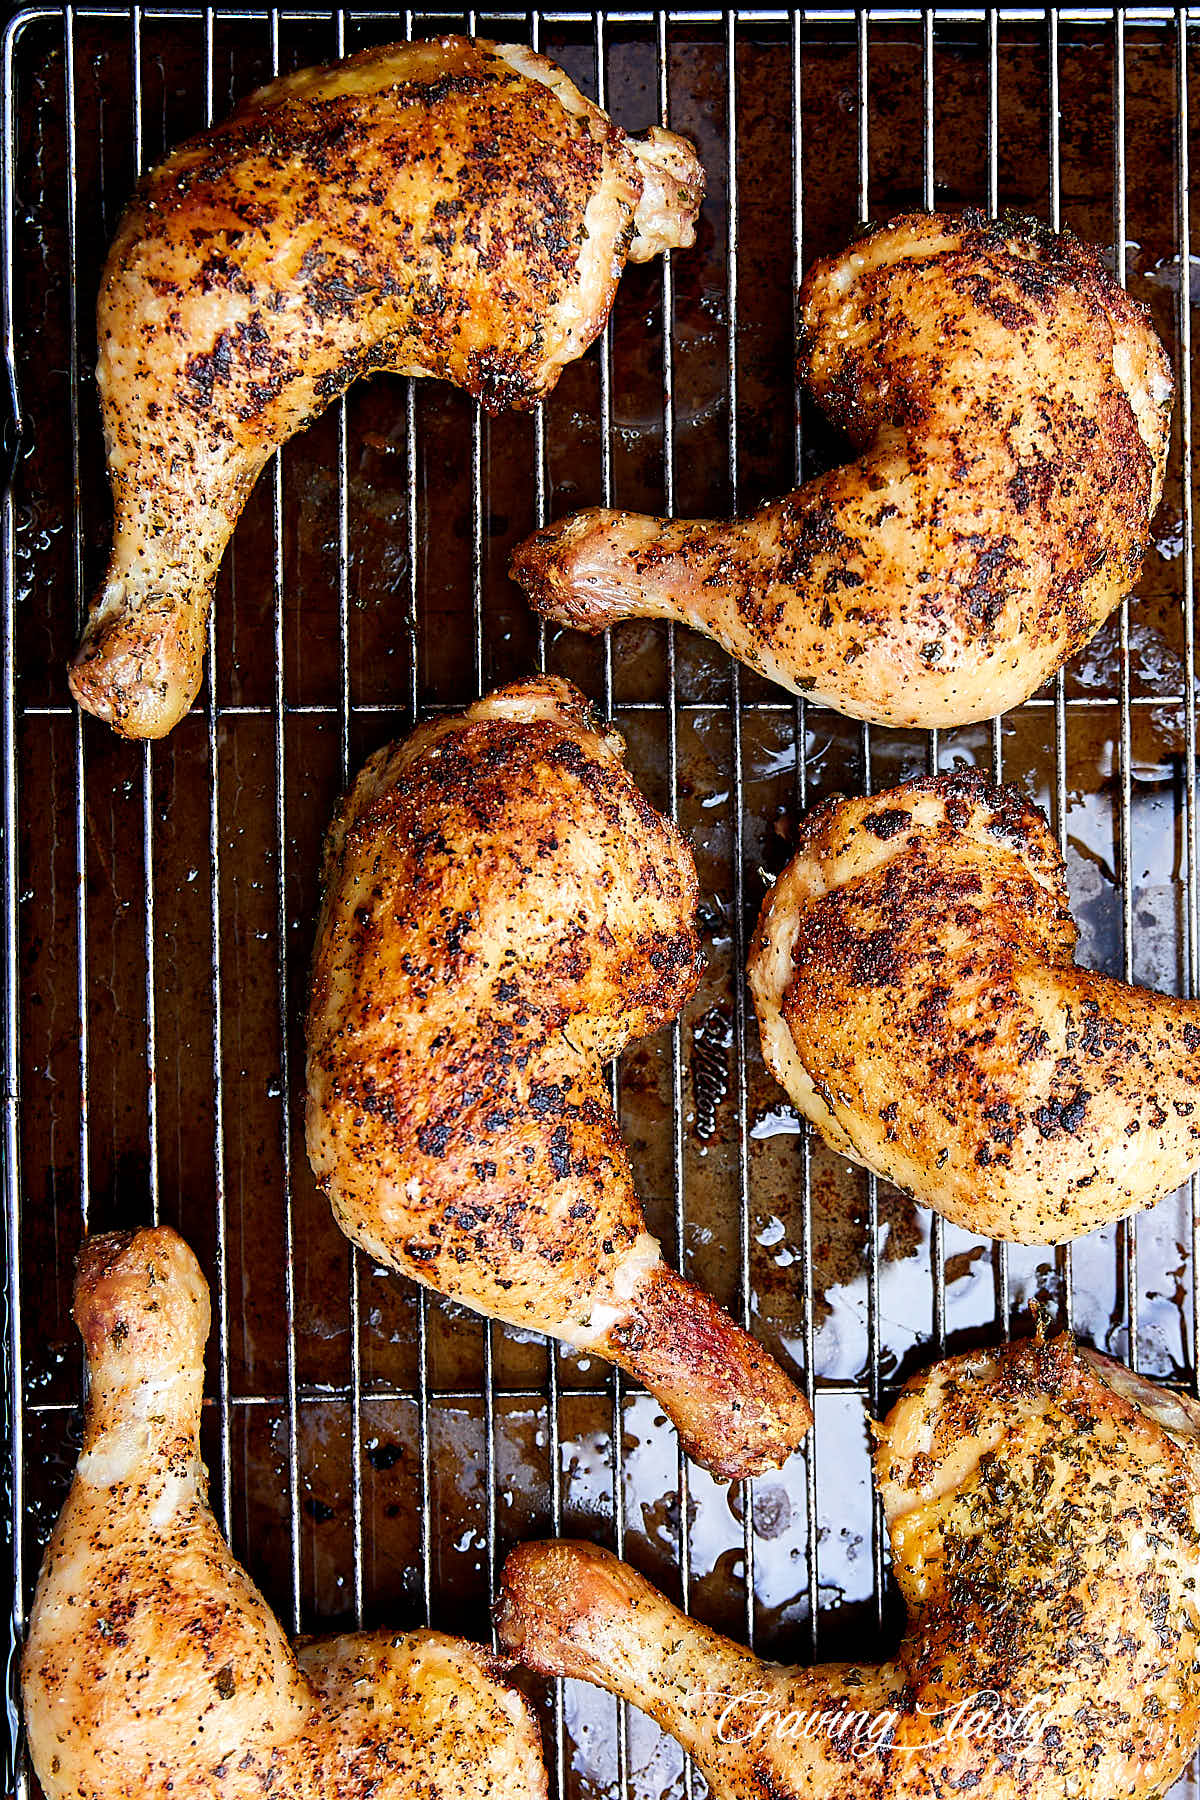 A top down view of six golden brown, crispy baked chicken quarters.